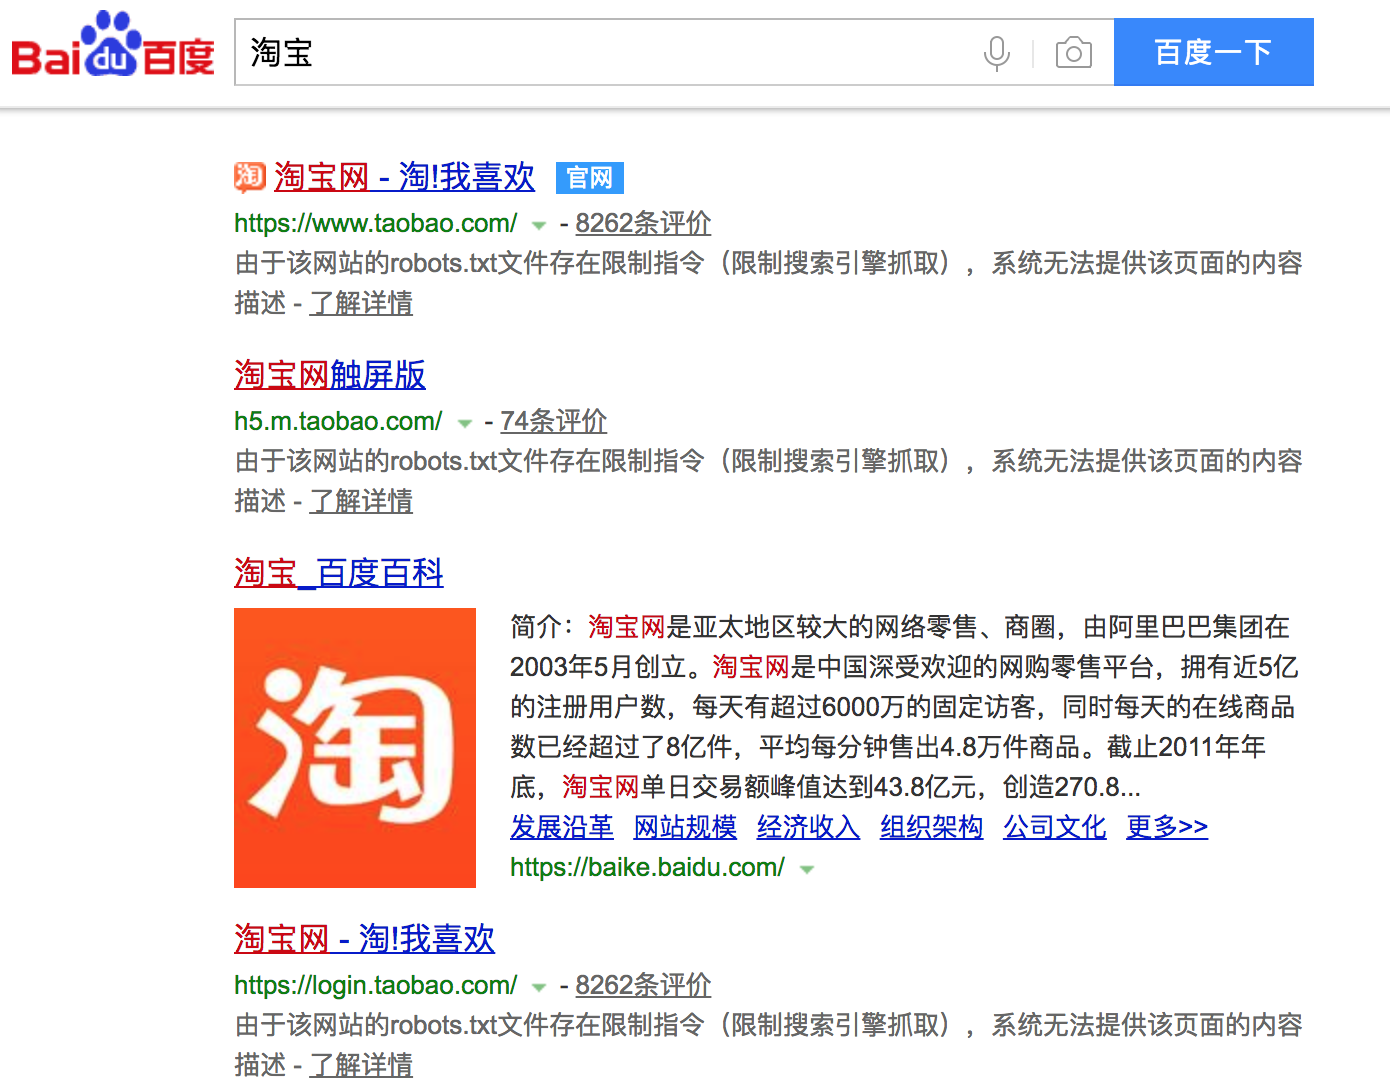 Day61-65/res/baidu-search-taobao.png